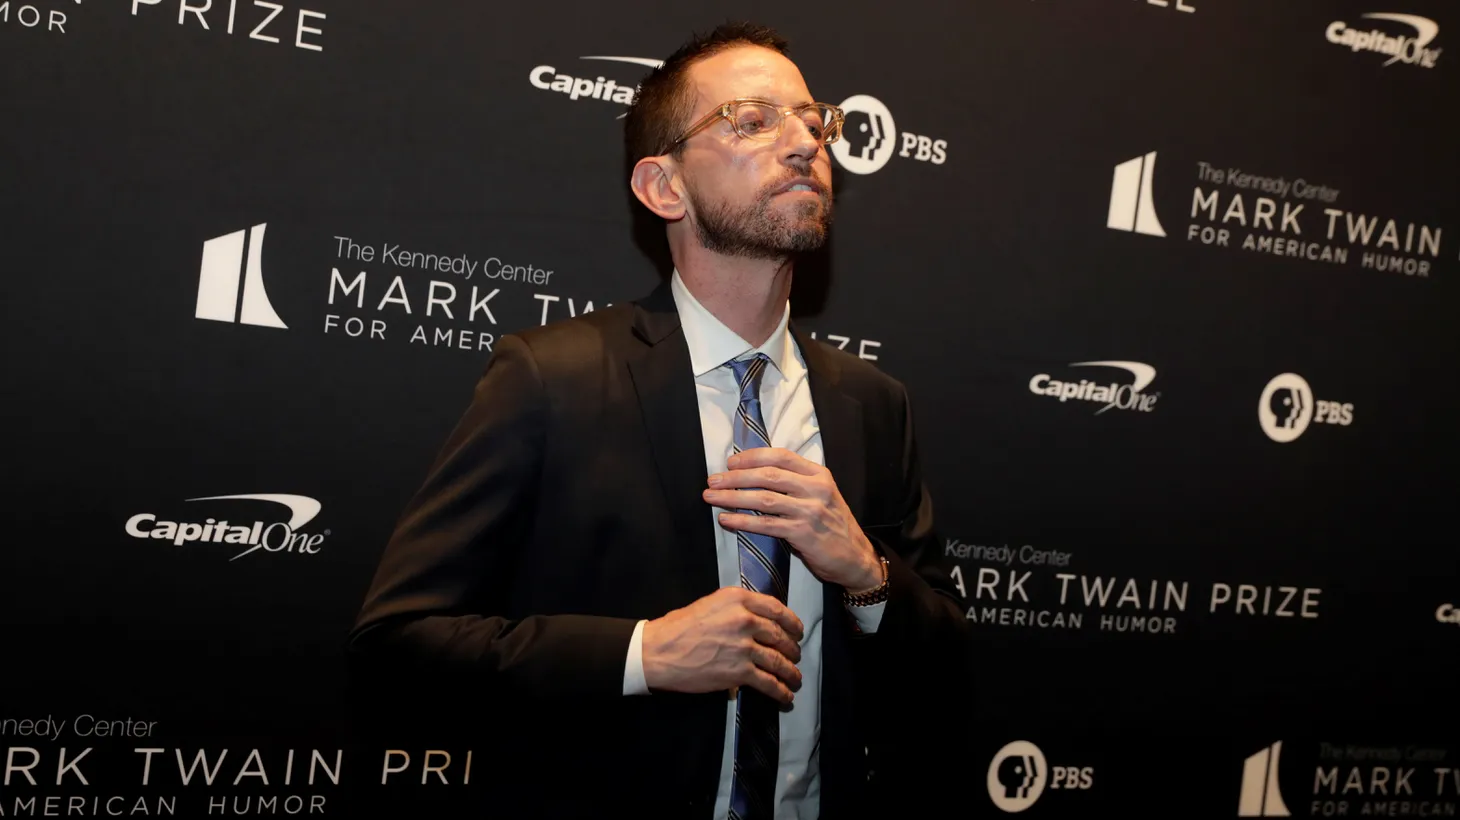 Neal Brennan arrives ahead of comedian Dave Chappelle receiving the Mark Twain Prize for American Humor at the Kennedy Center in Washington, U.S., October 27, 2019.